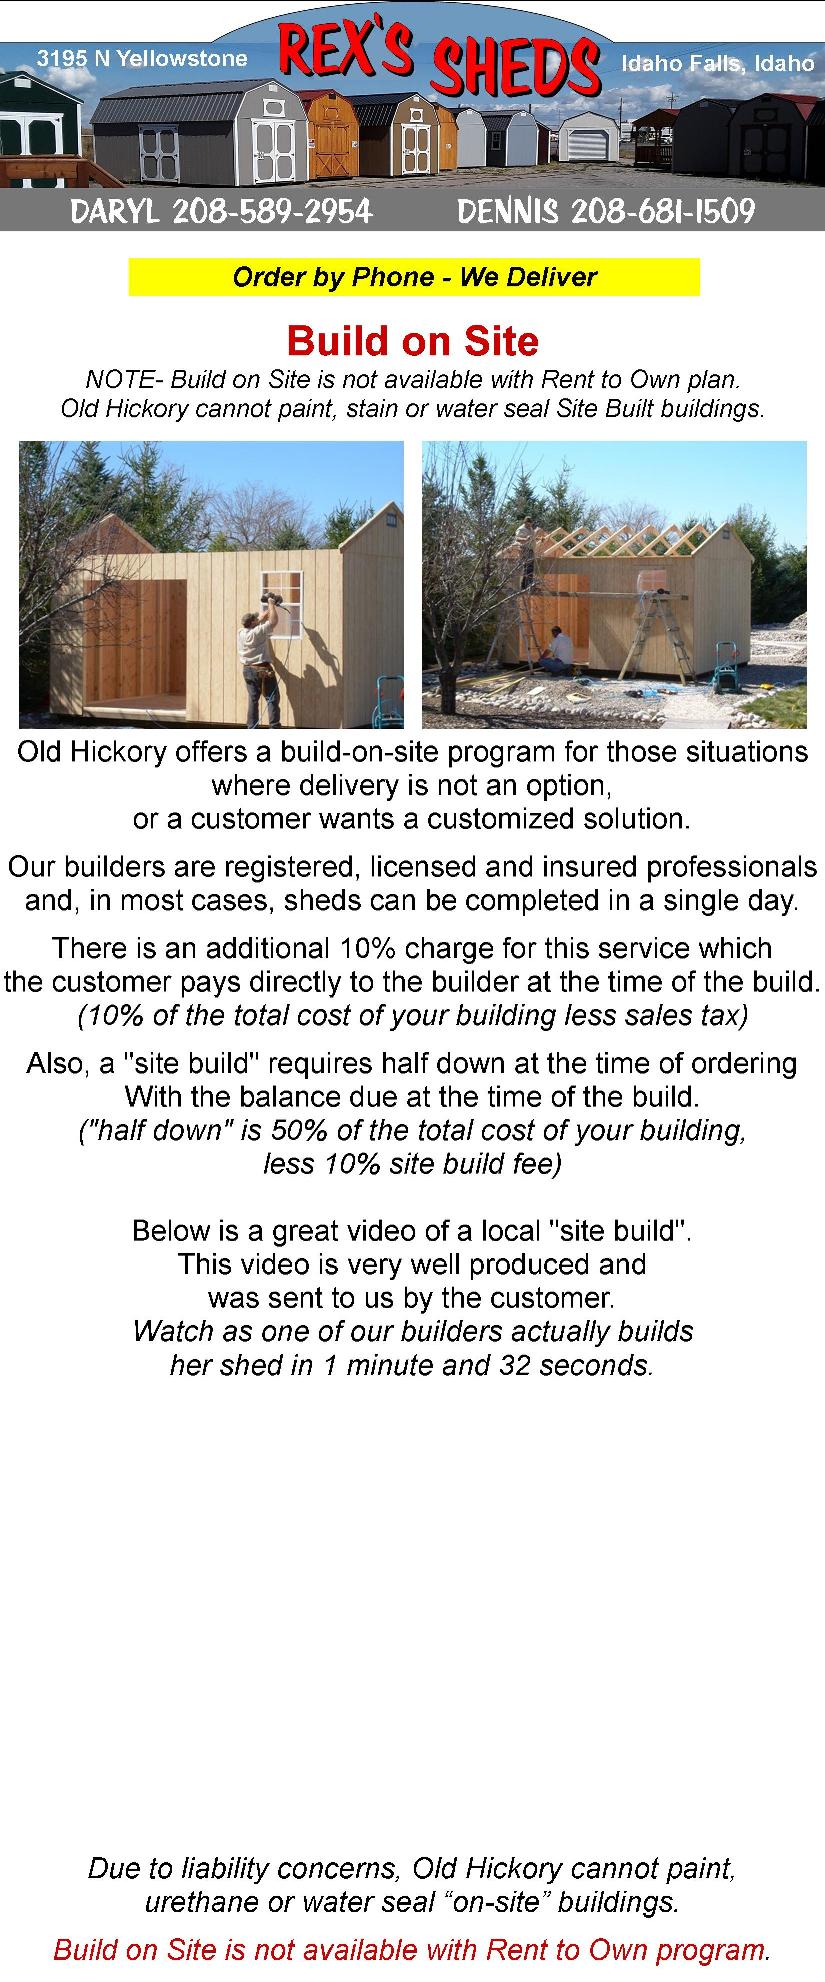 image_of_and_cost_of_sheds_built_on_site_at_your_location_with_link_to_video_of_shed_build_on_site